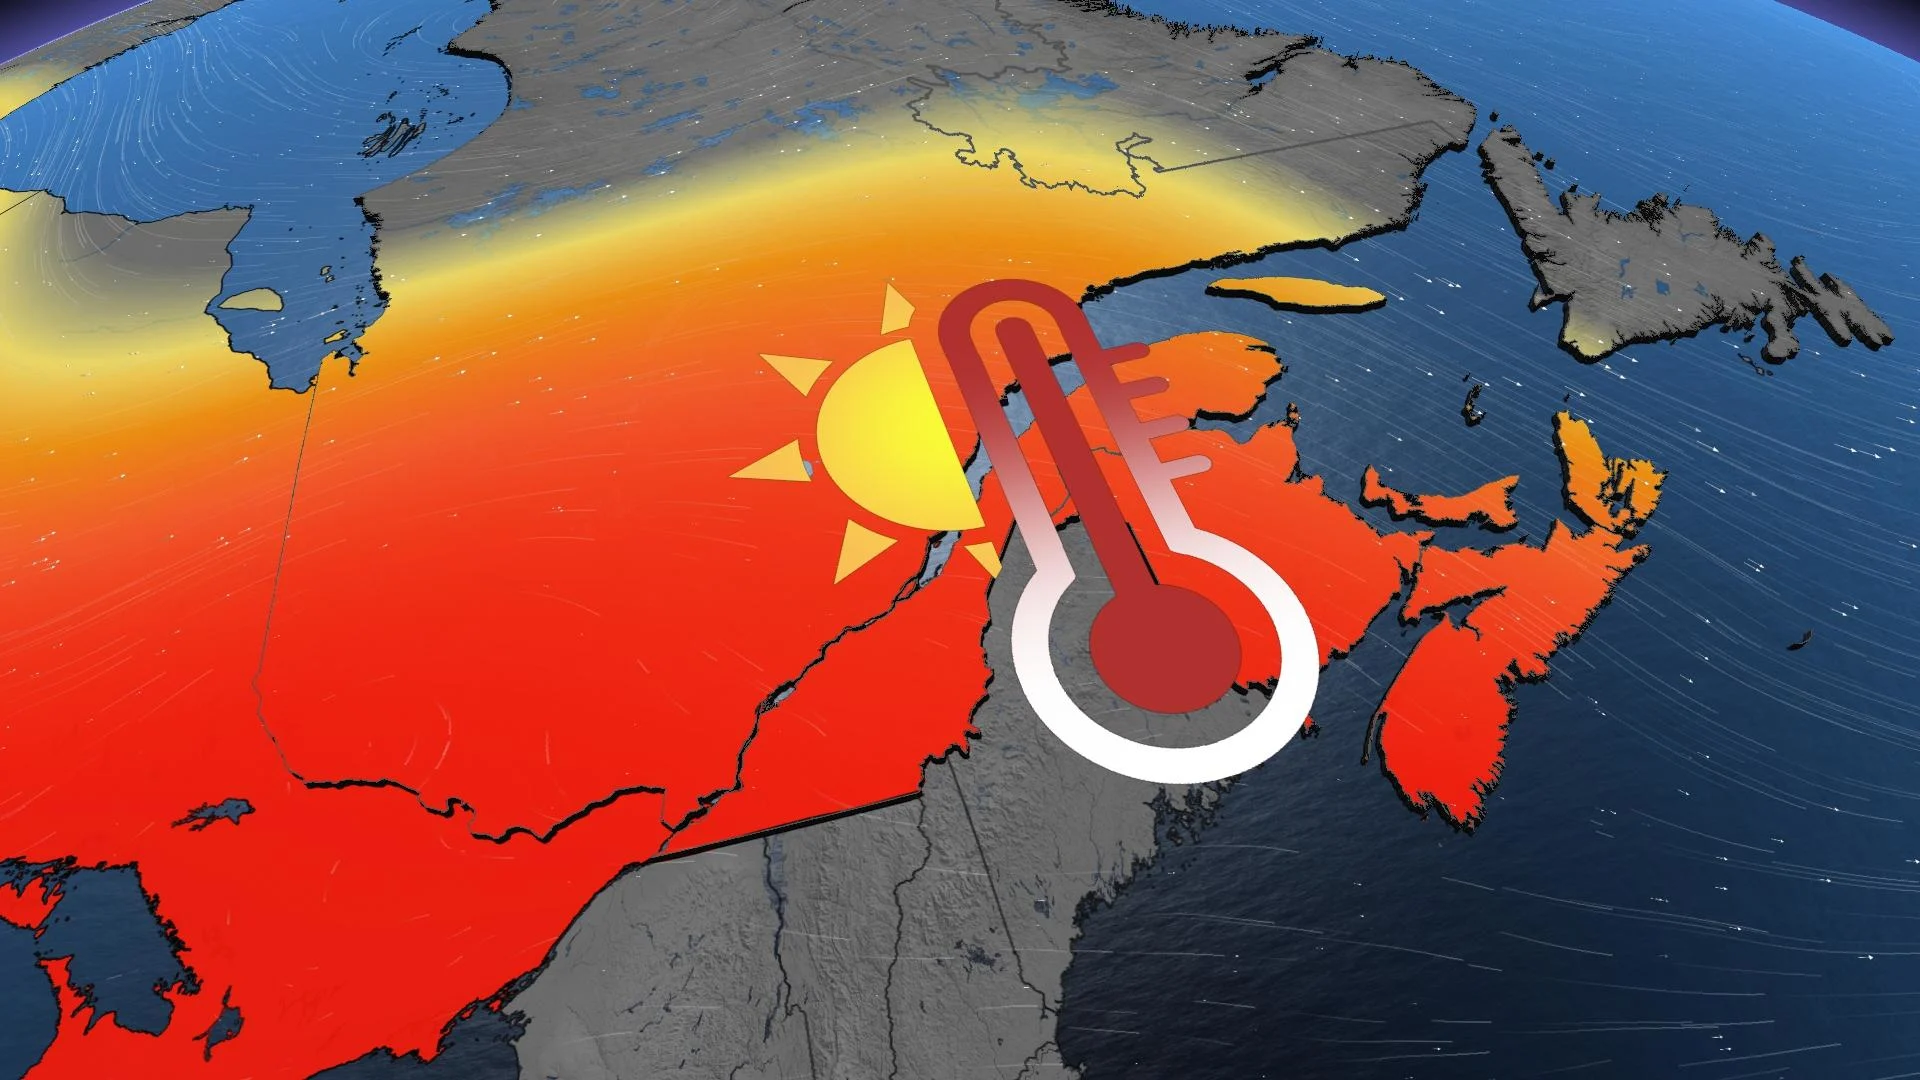 Eastern Canada cities have shot at warmest September overnight lows